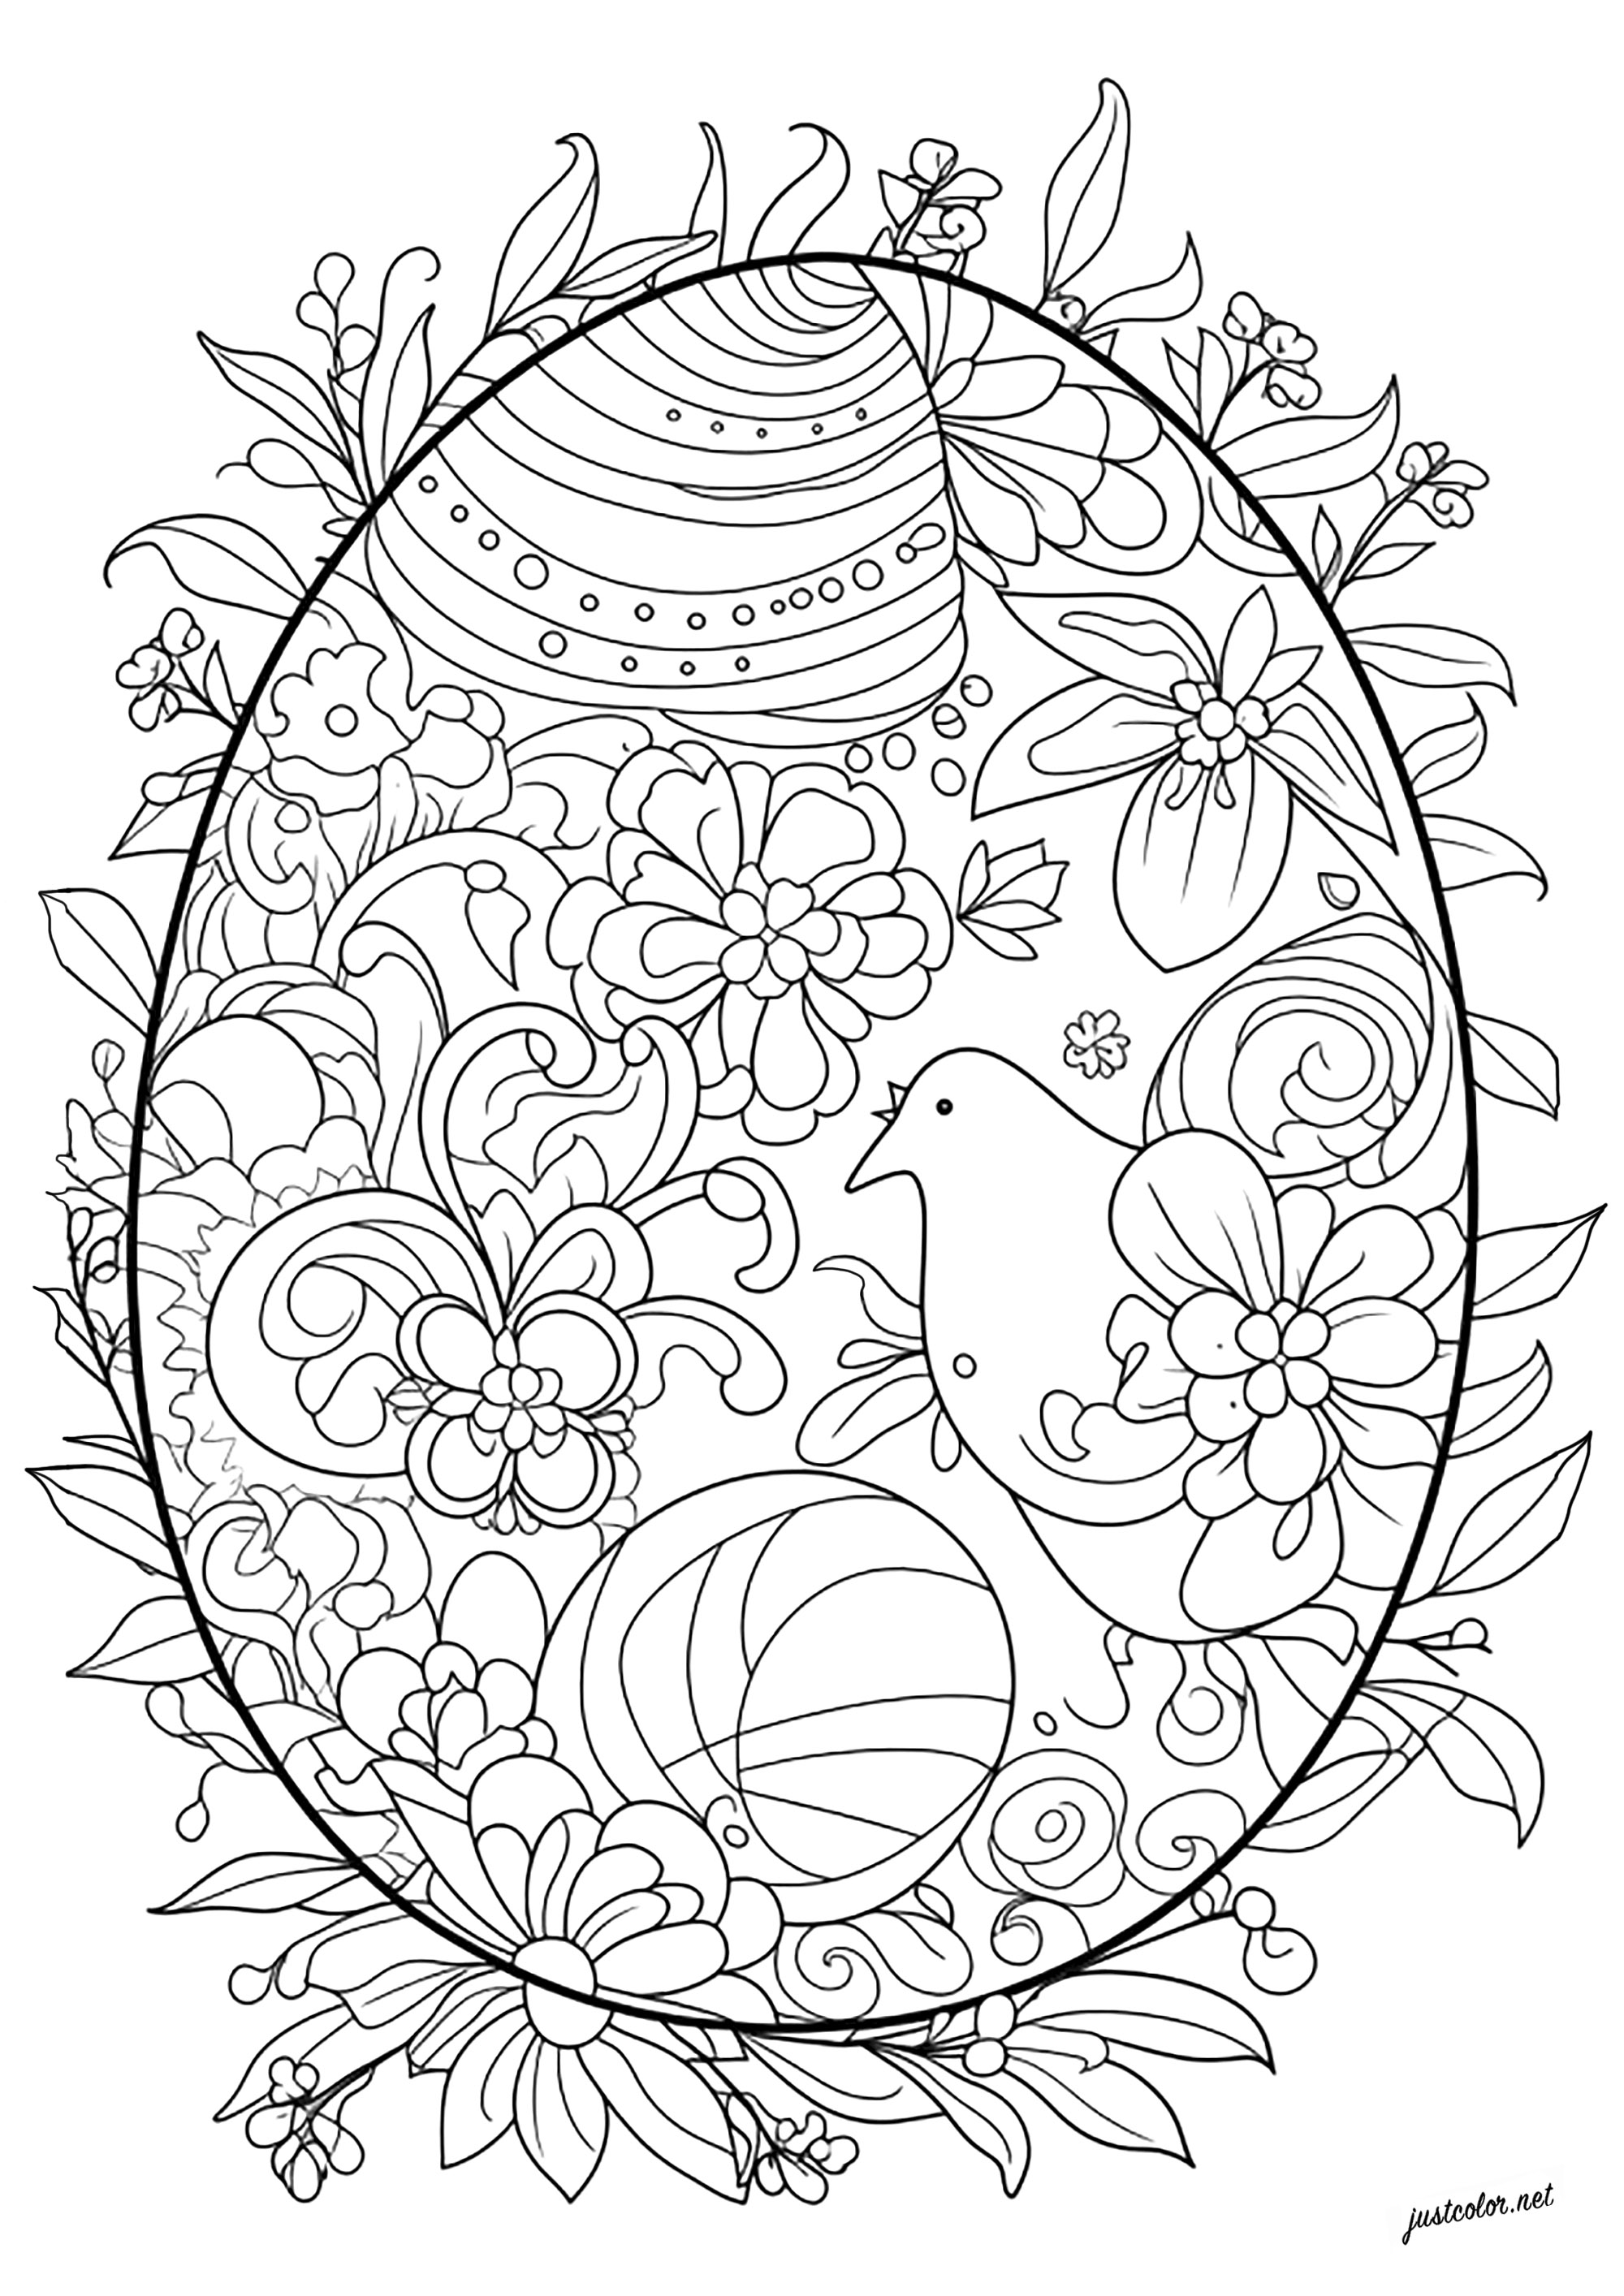 Complex coloring of an Easter egg. Many abstract patterns, flowers and even a chicken to color in this beautiful Easter egg